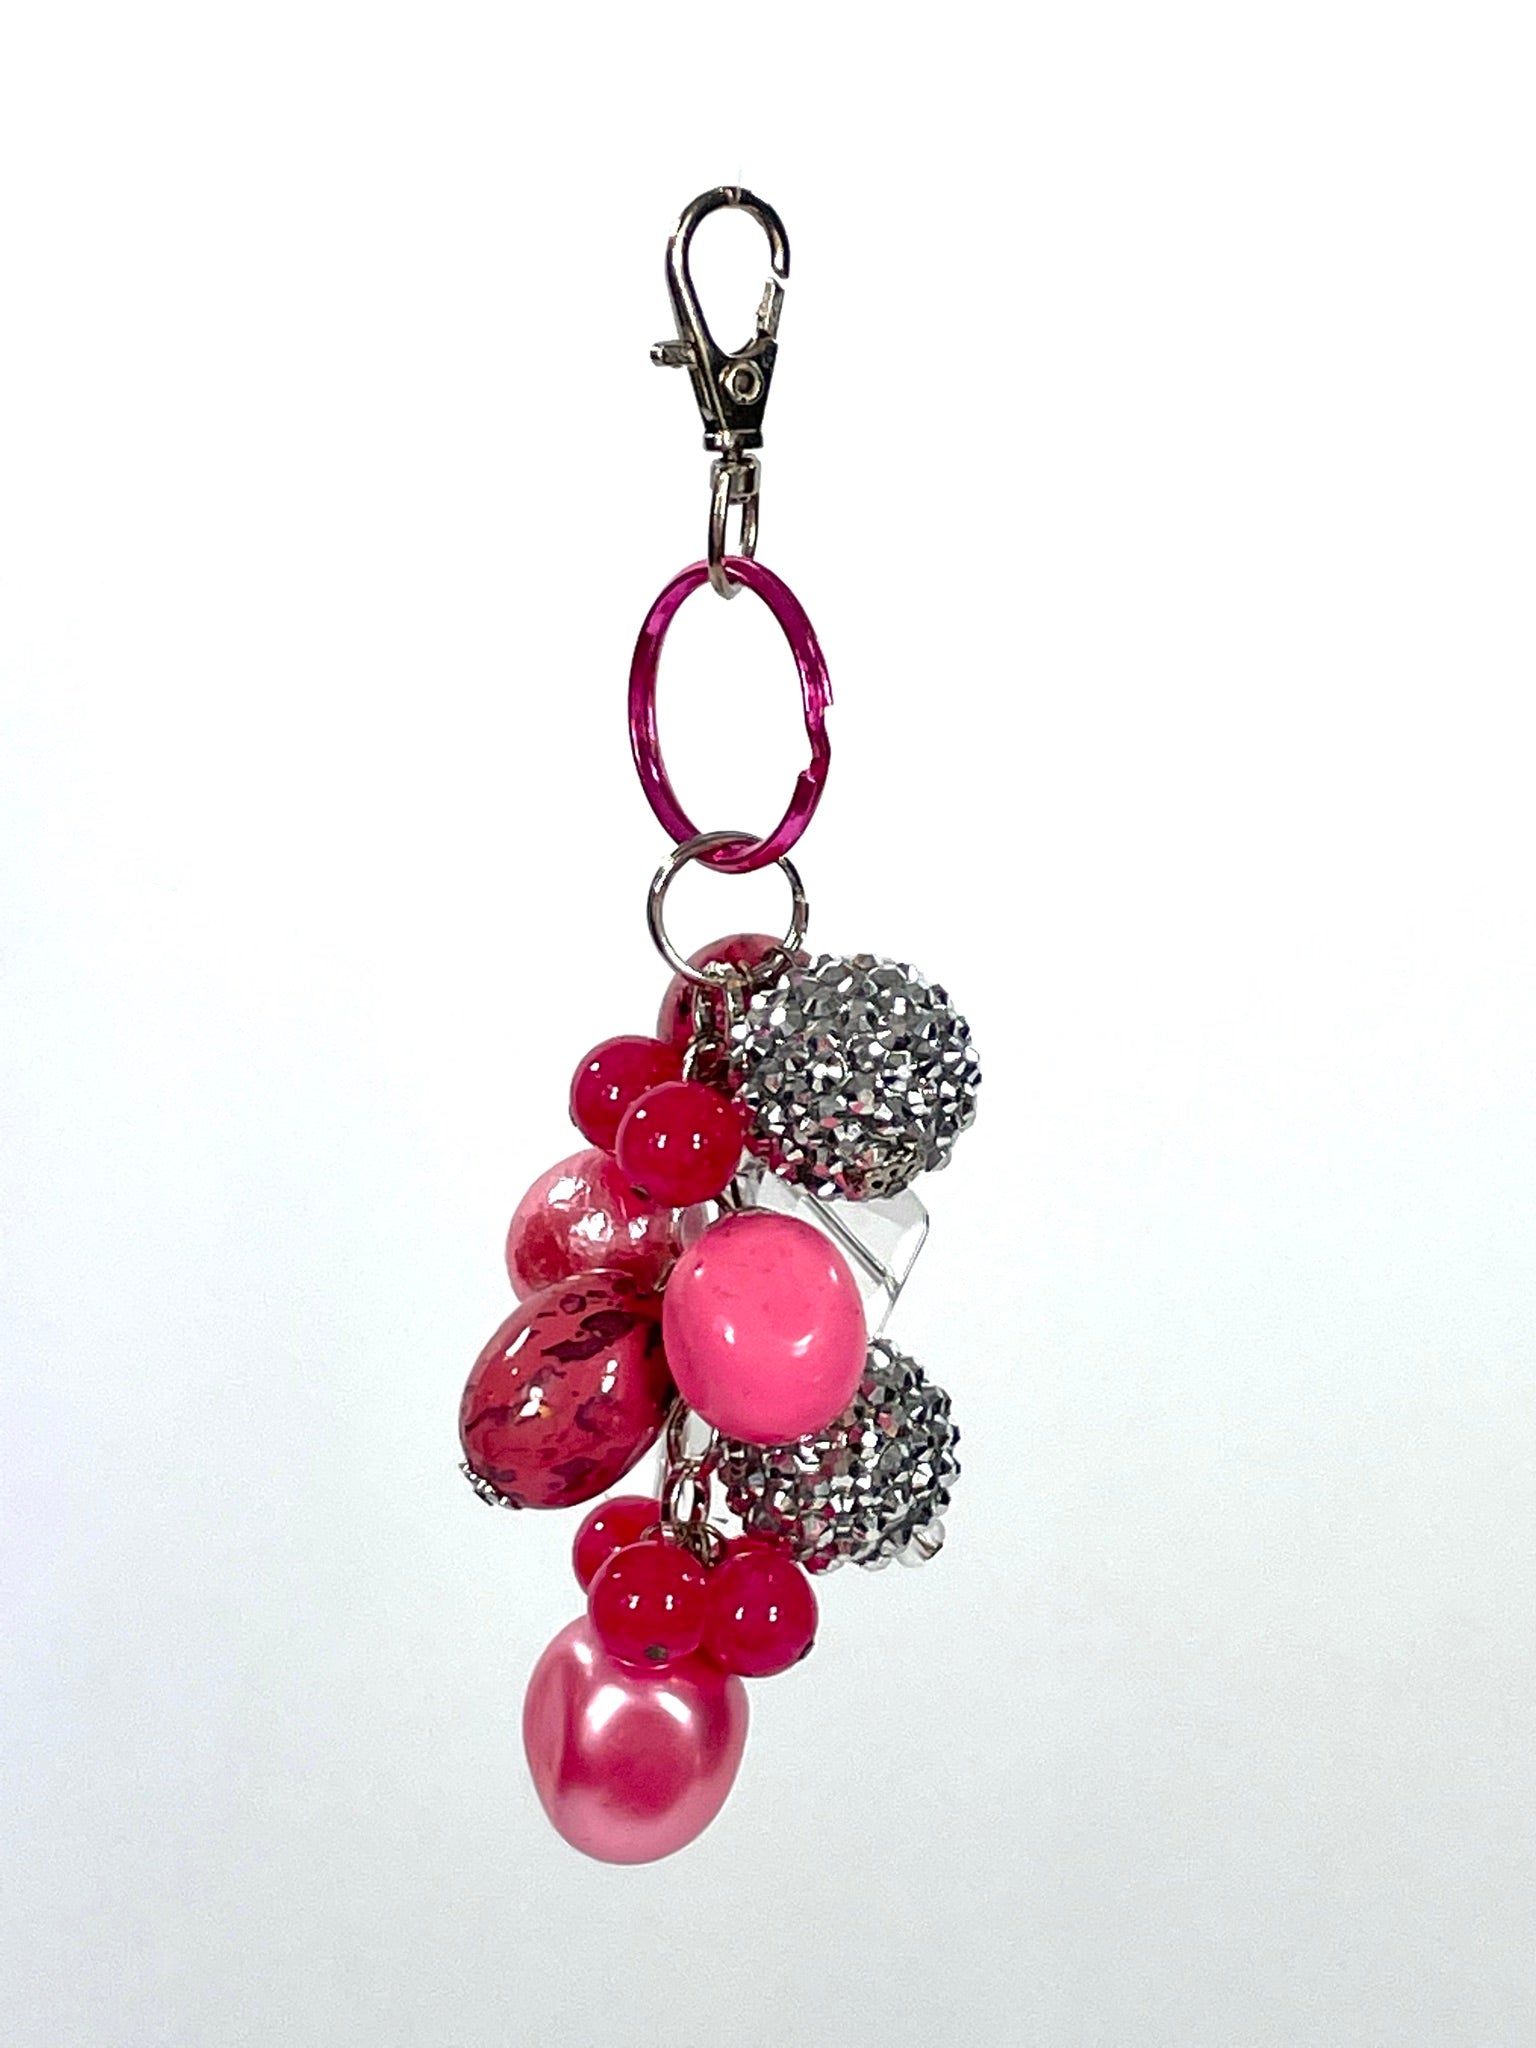 Hot Pink Keychain Purse Bling